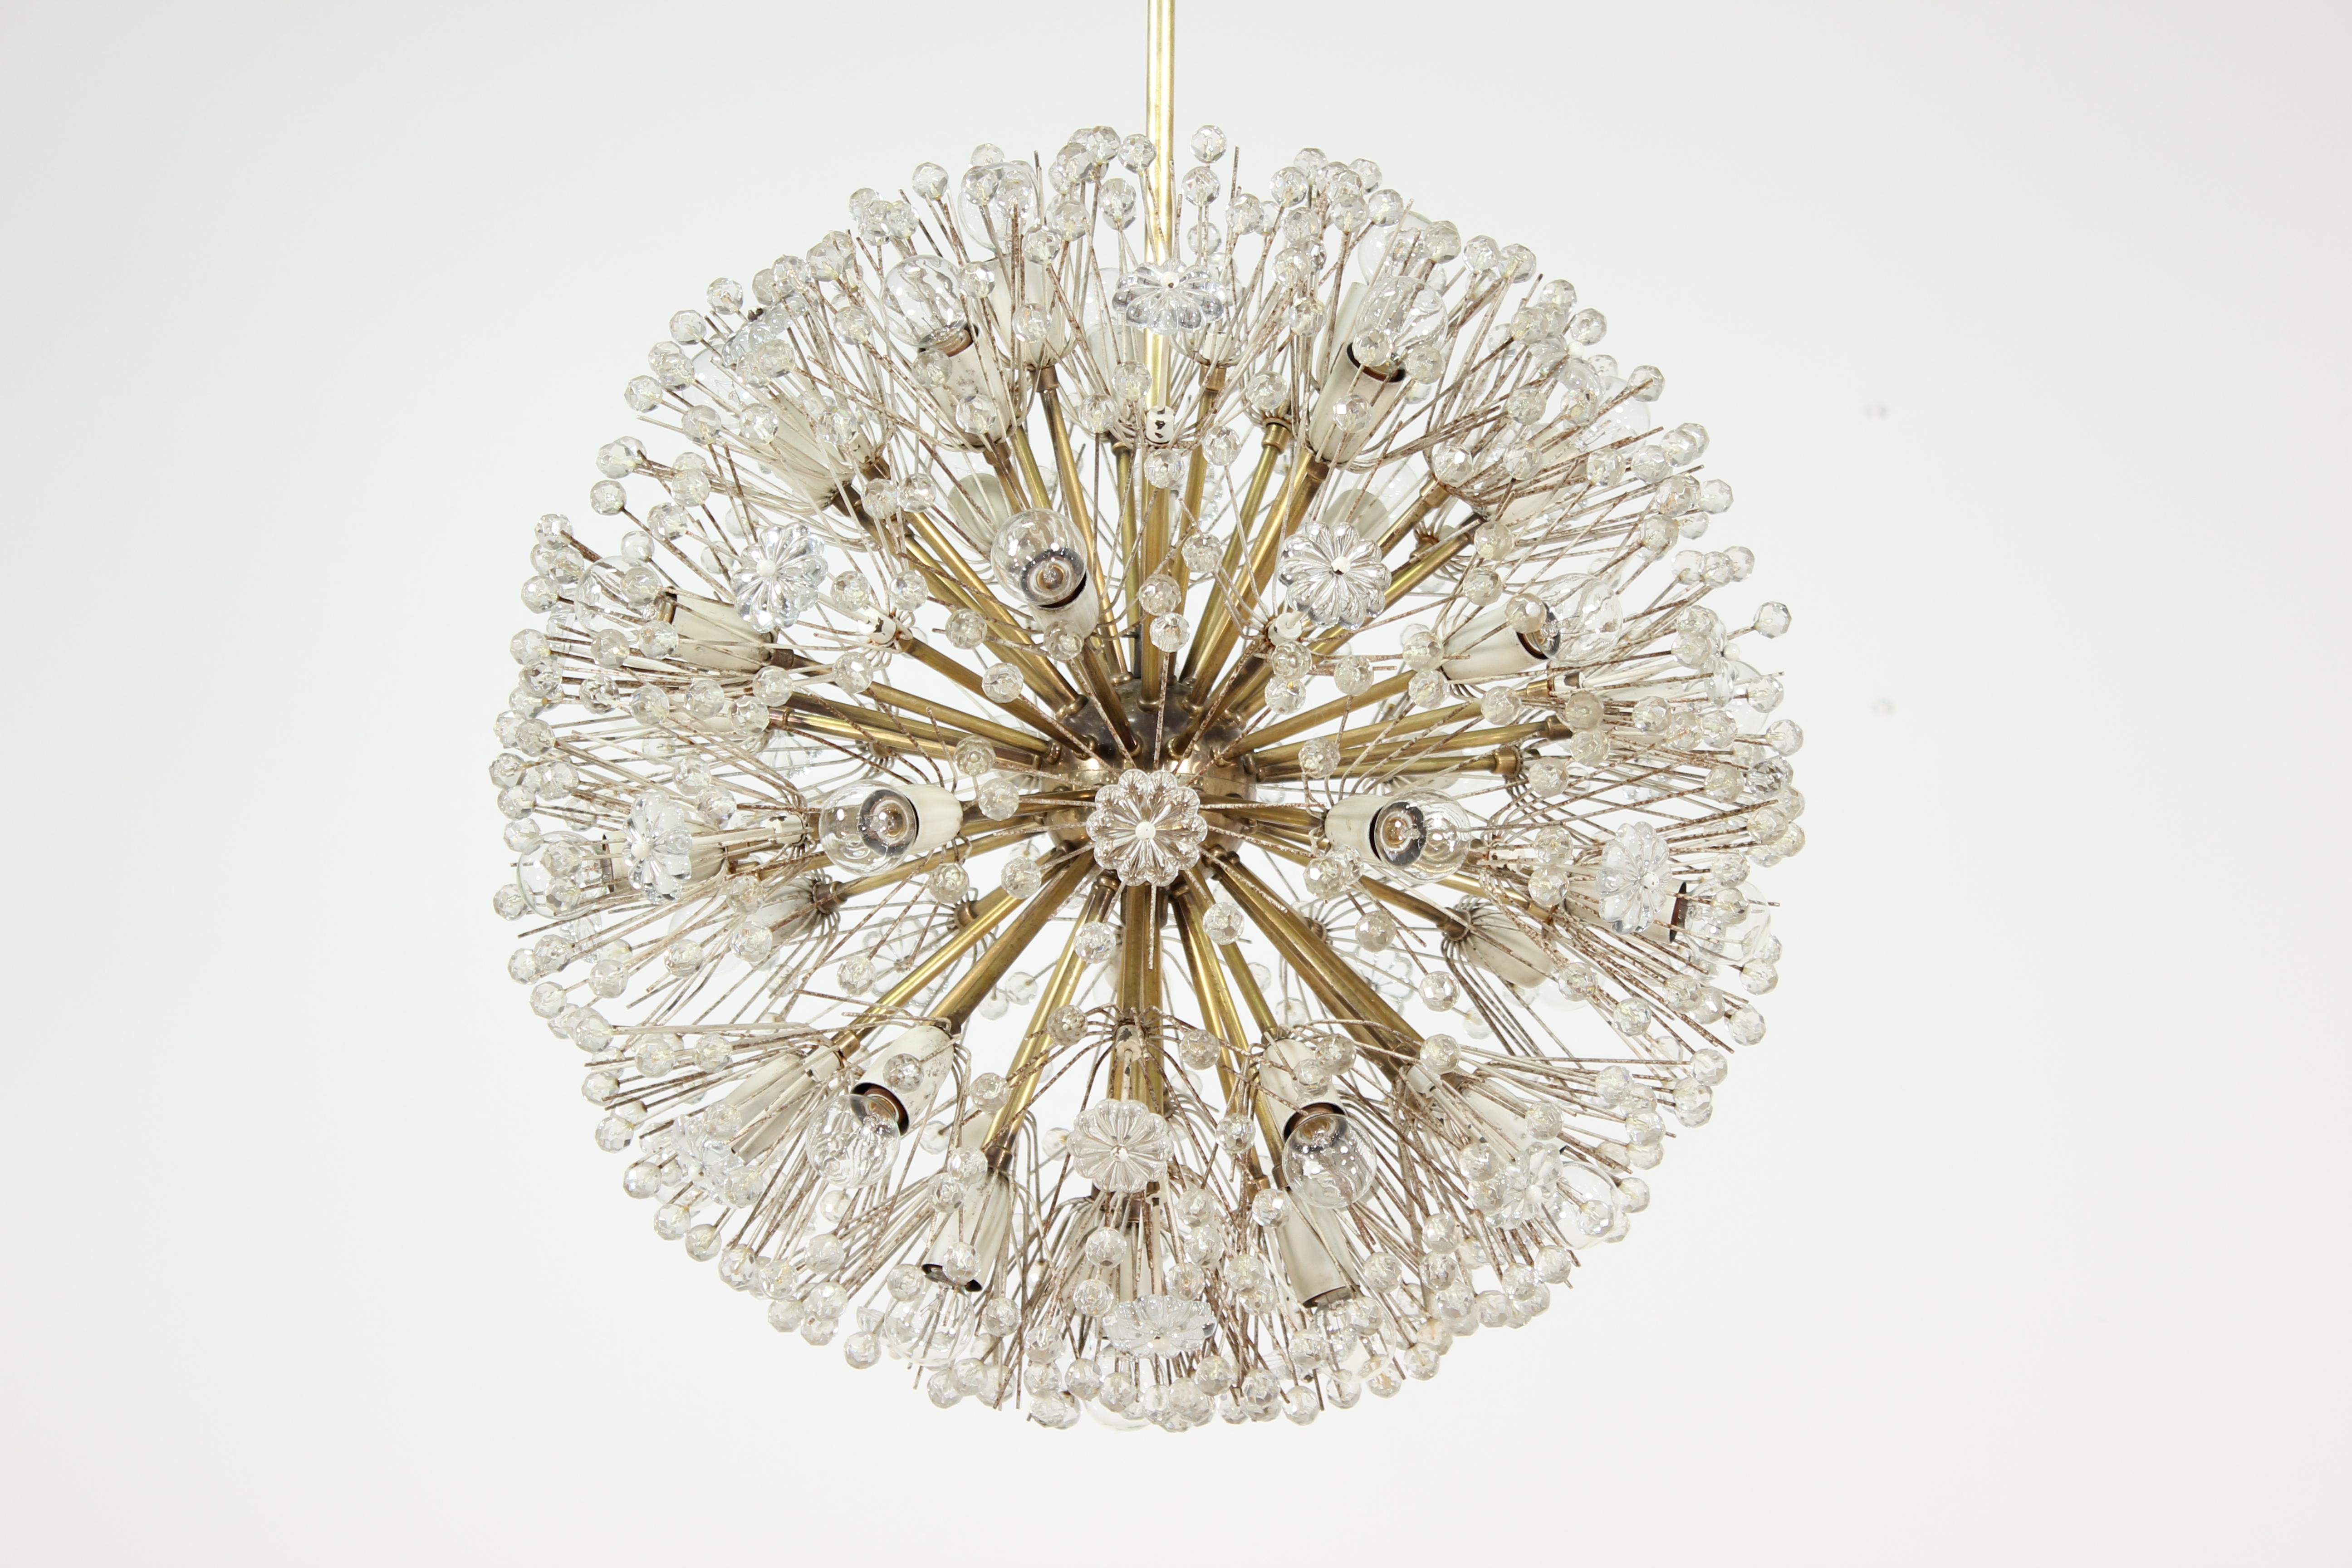 Spectacular, 1960s Emil Stejnar “Dandelion” chandelier for Rupert Nikoll, Austria. This sparkling orb is one of the larger versions of this design. The chandelier consists of a brass body and arms with white enameled socket covers (each surrounded